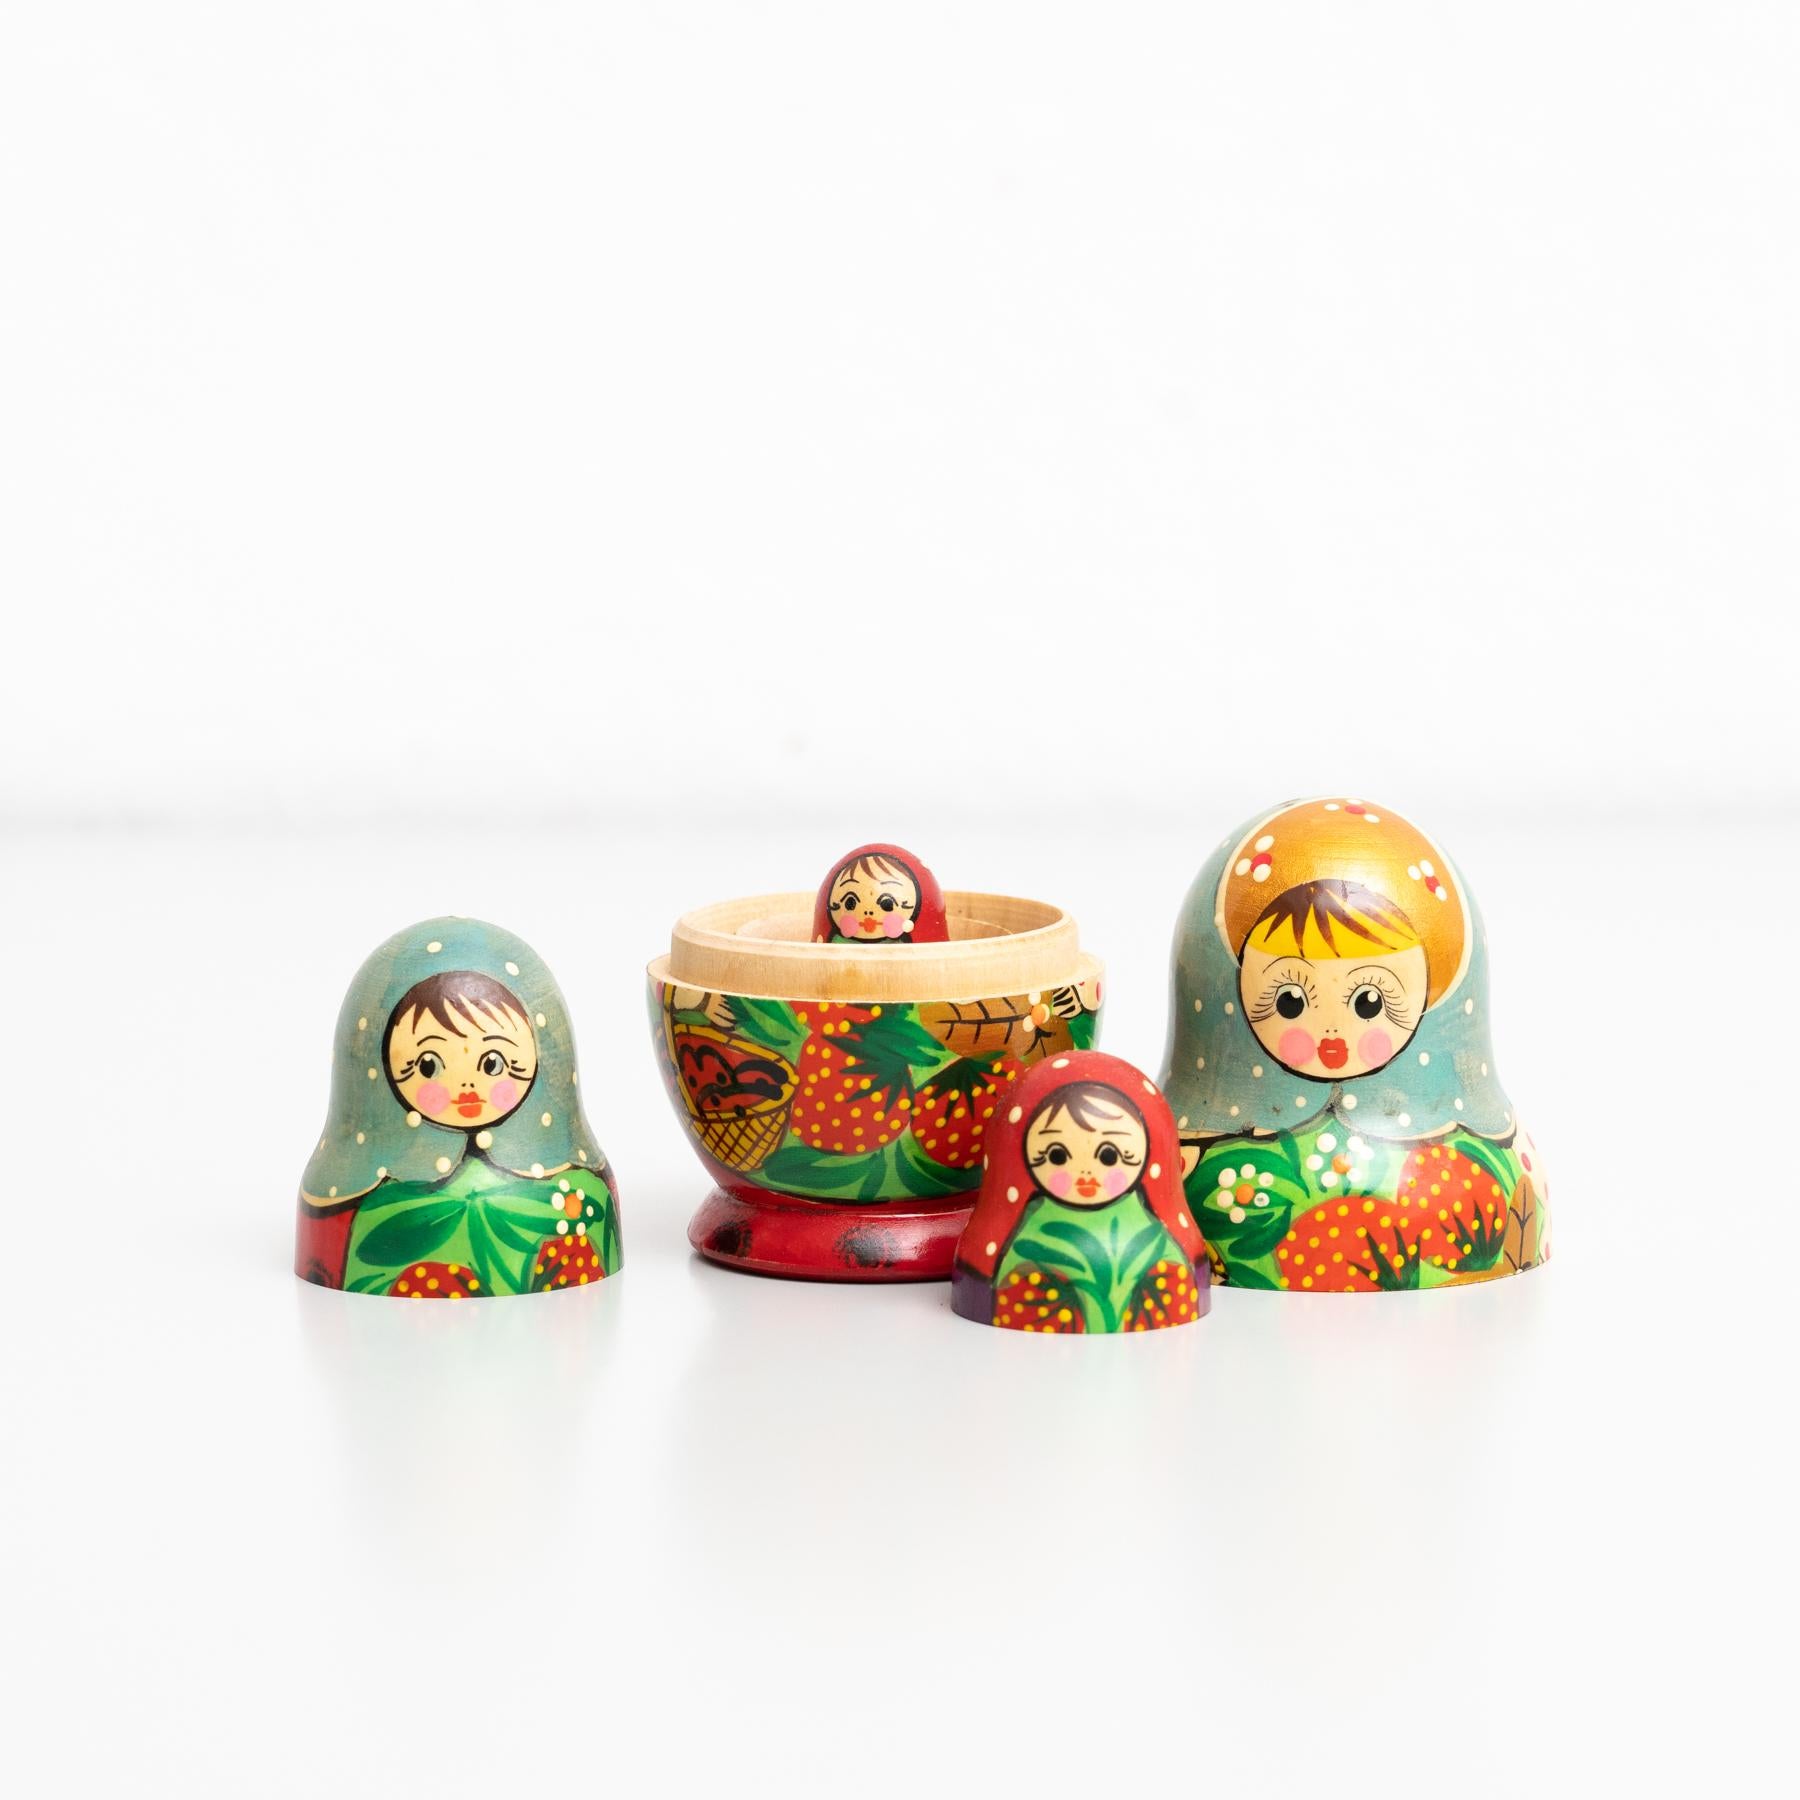 Antique Traditional Hand-Painted Wooden Russian Doll, circa 1960 For Sale 4